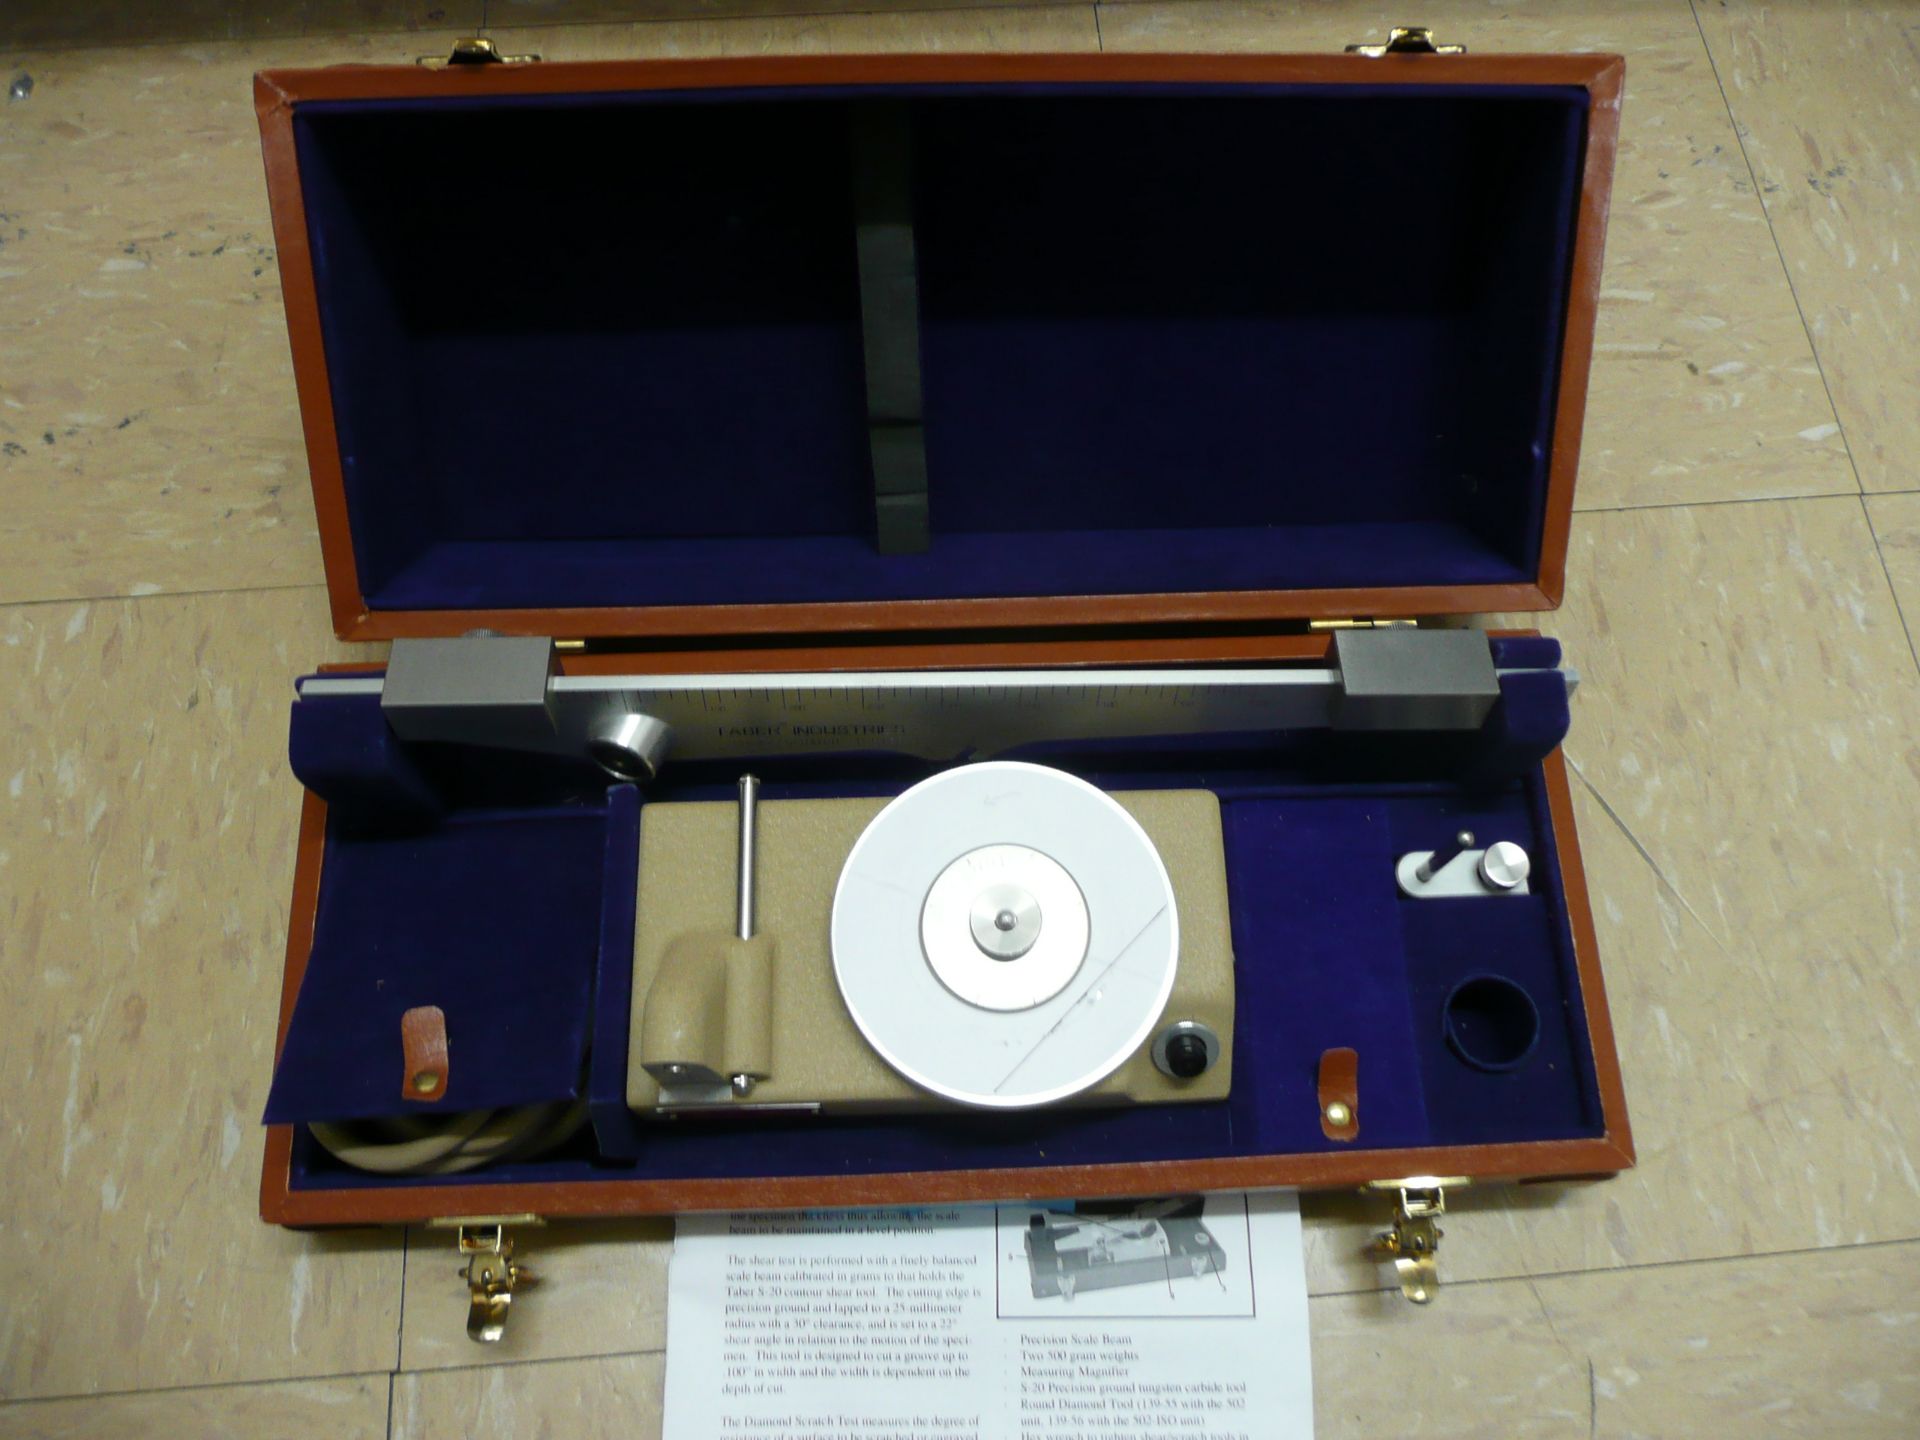 Taber, 502 shear/scratch tester with precision scale beam, specimens size should be 4" x 4" x ¼" max